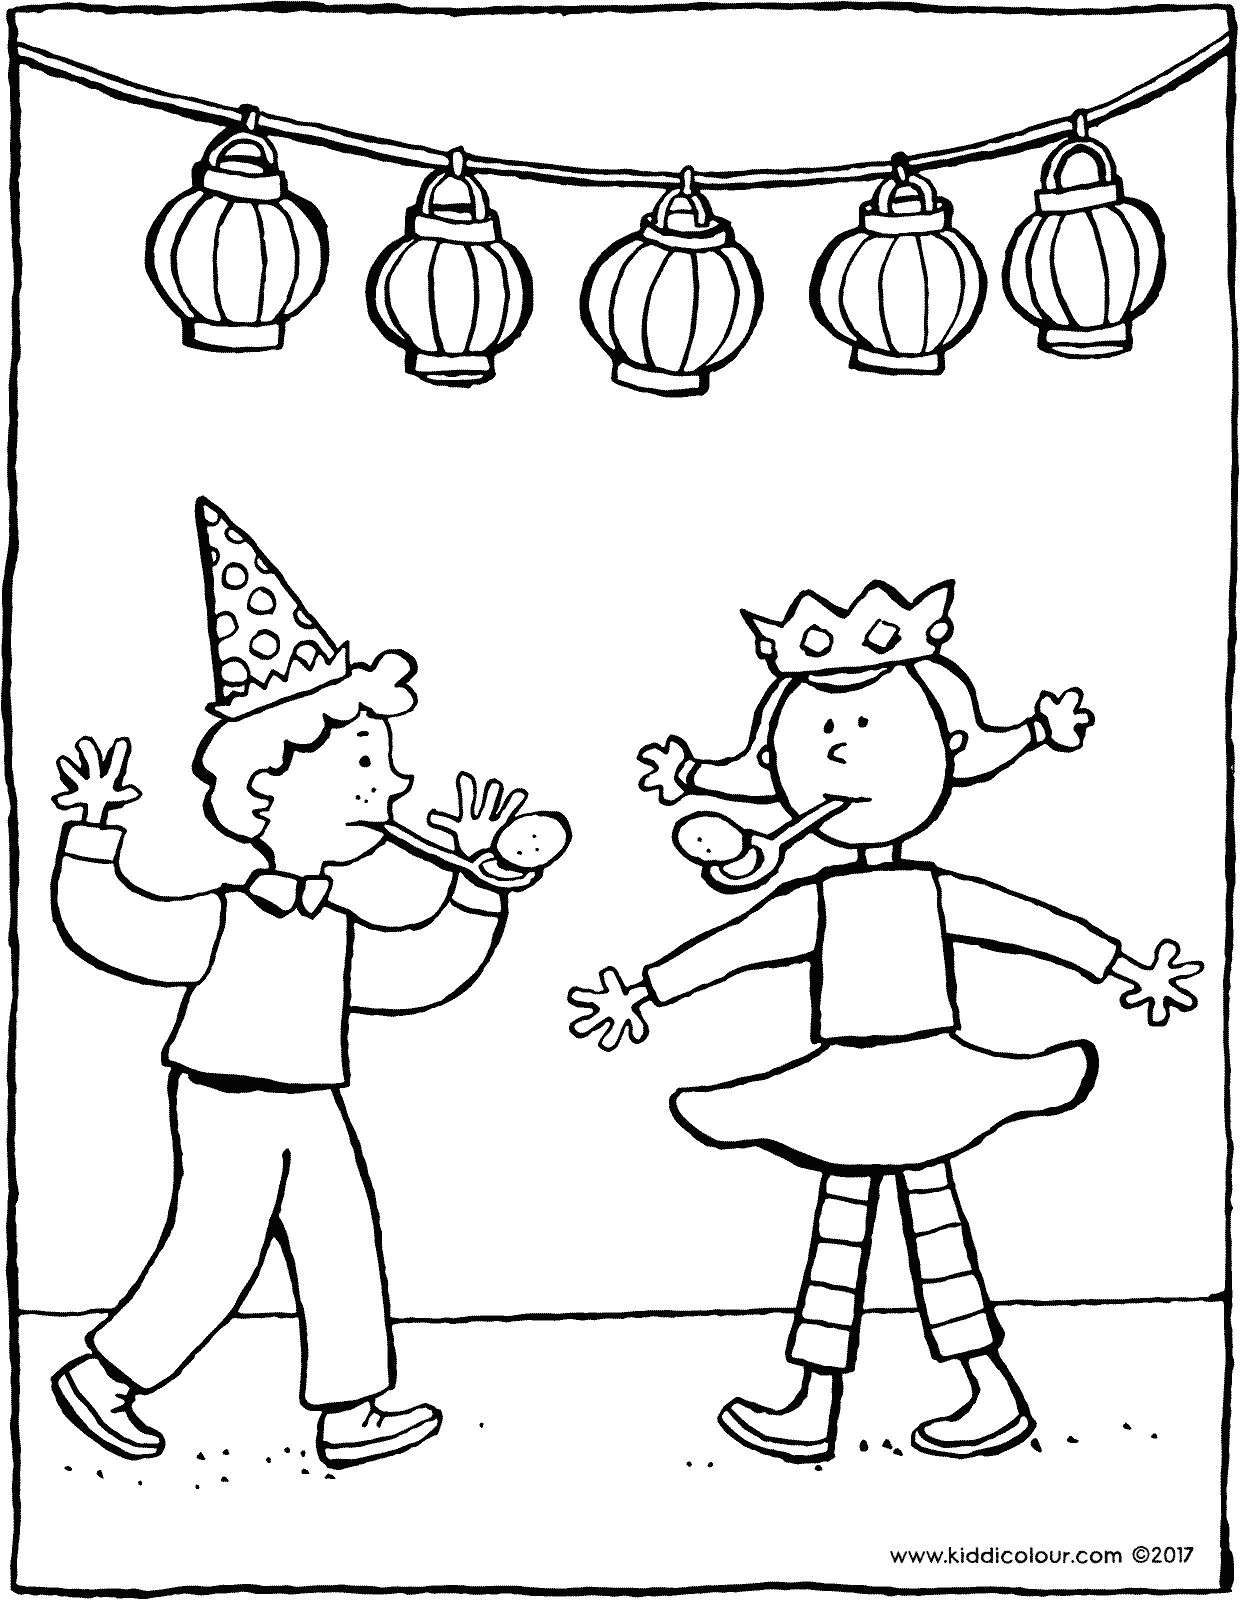 birthday party coloring page bonggamom finds january 2013 birthday party page coloring 